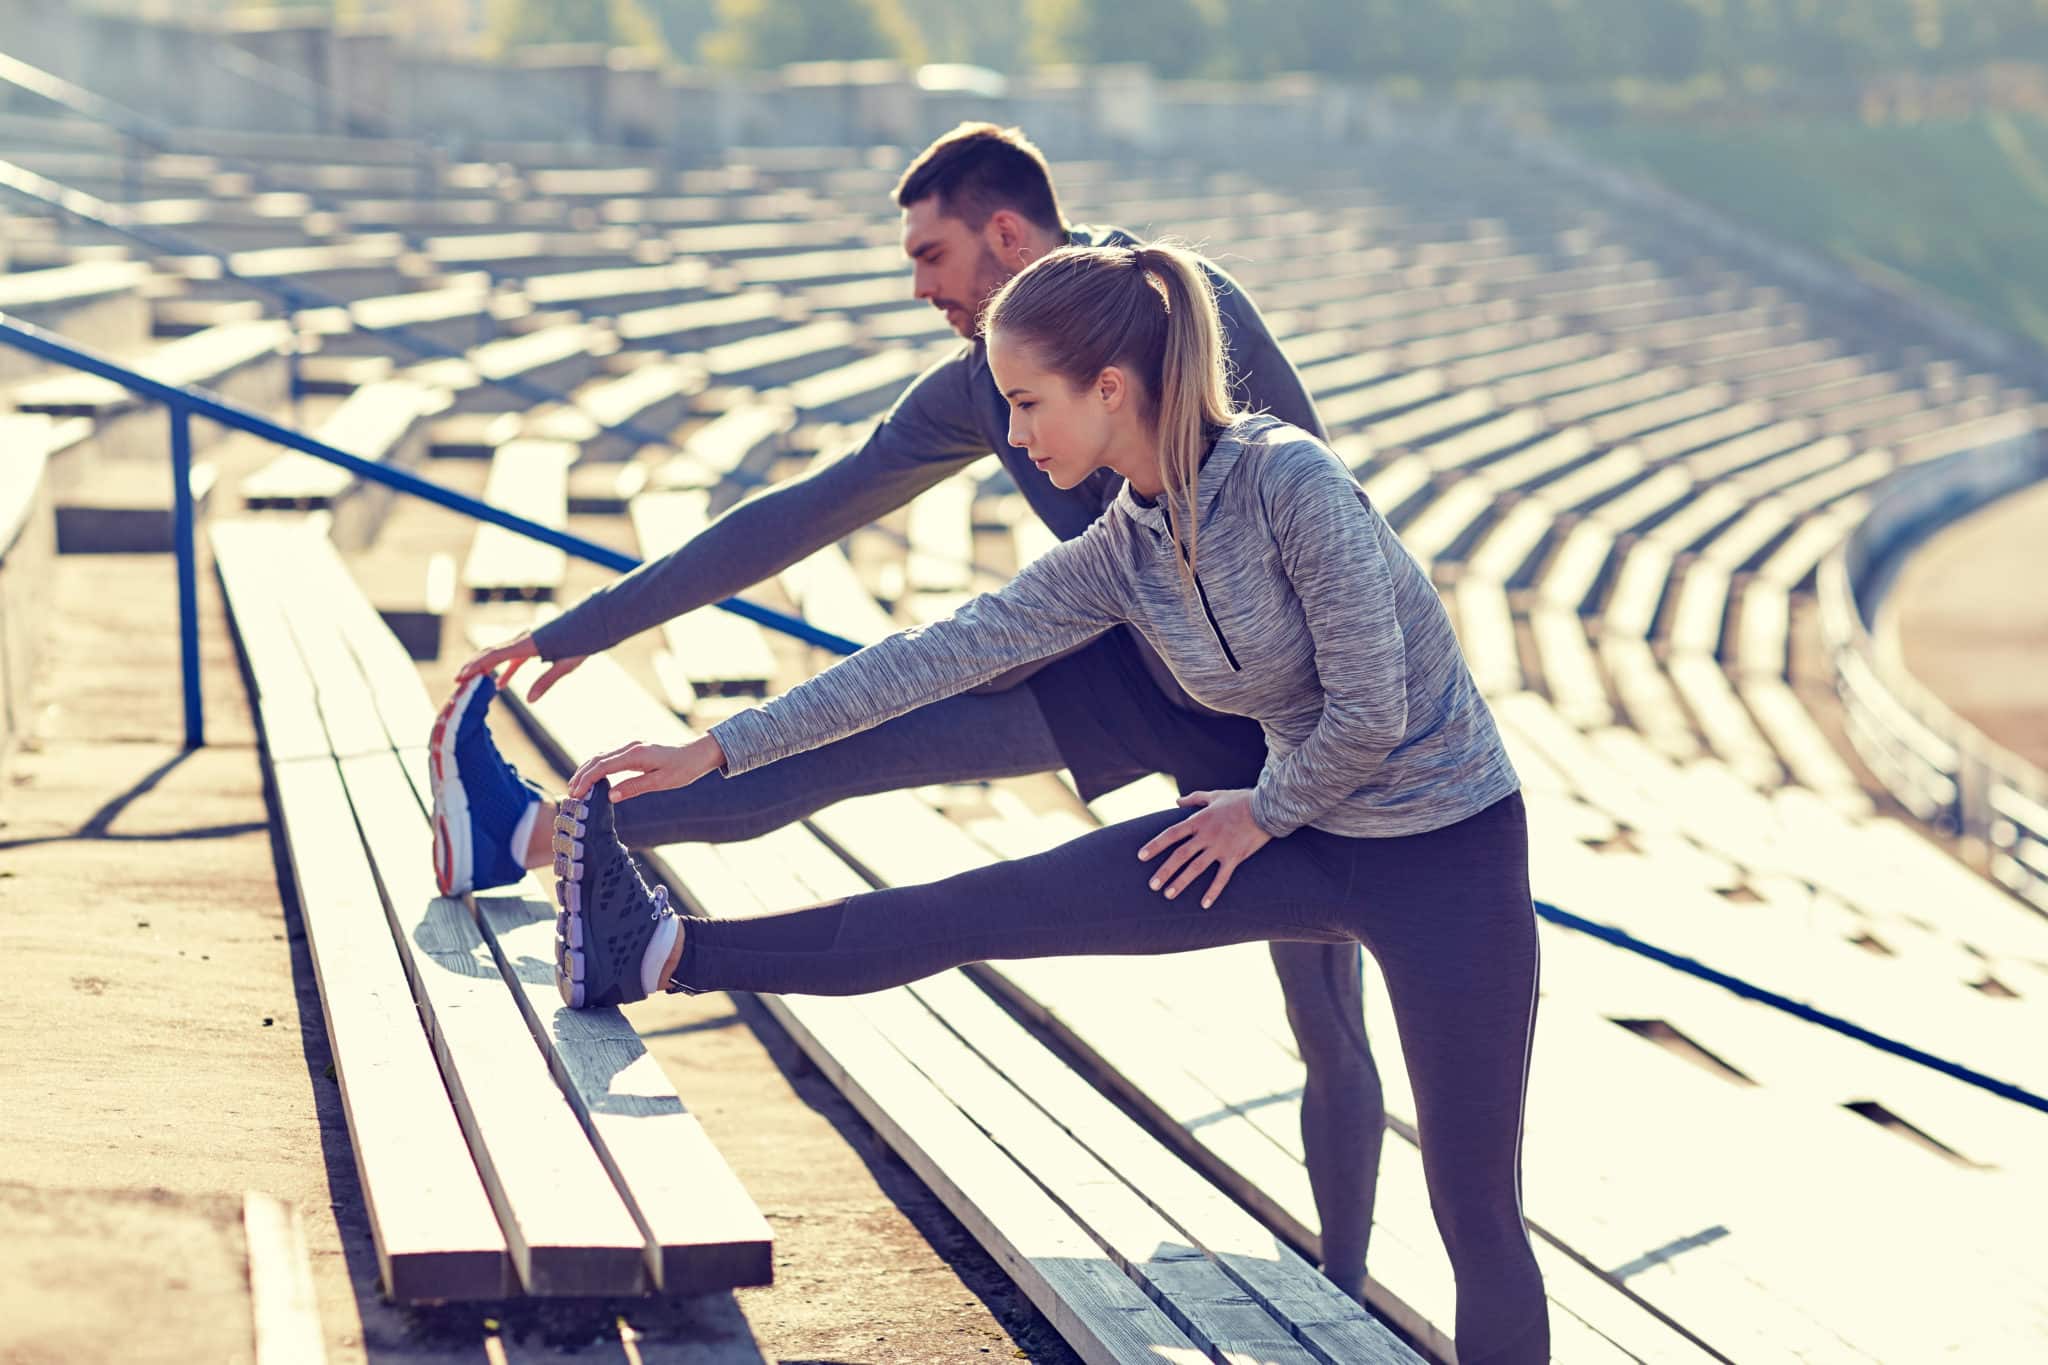 A man and a woman wearing athletic gear, stretching out their legs and reaching for their toes on bleachers.